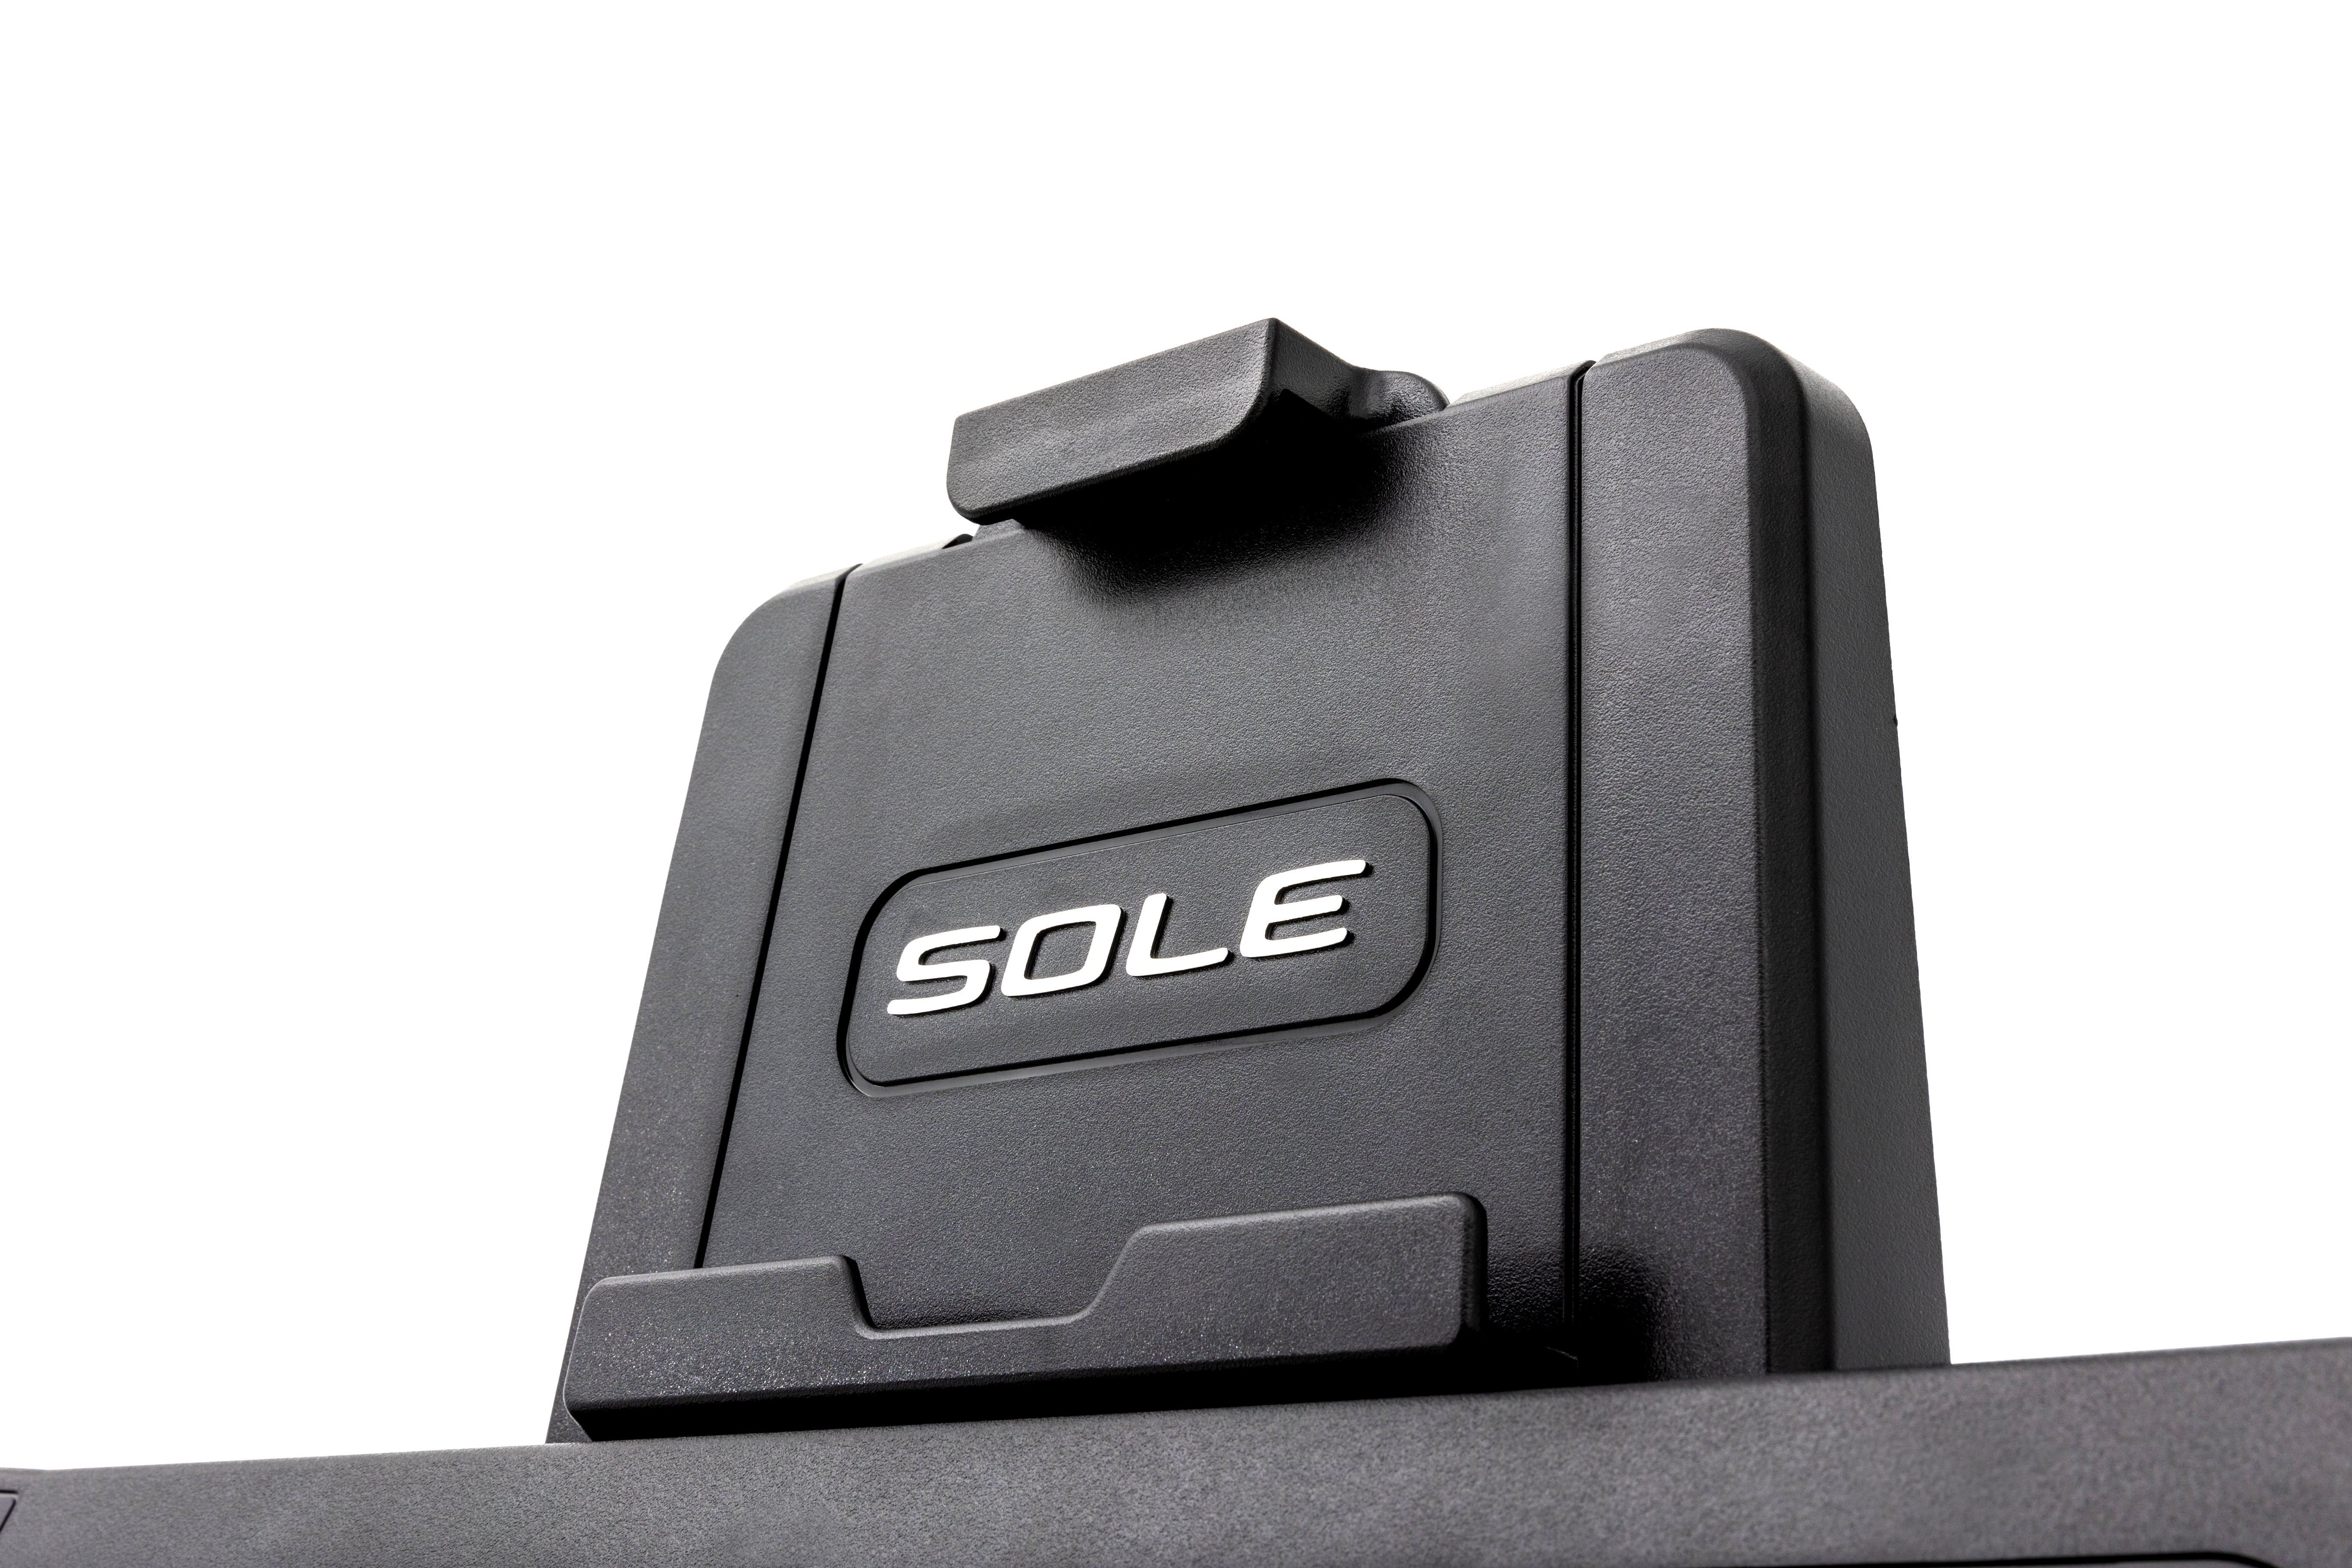 Detailed view of the Sole ST90 treadmill's tablet holder, emphasizing the embossed "SOLE" logo and textured black finish.